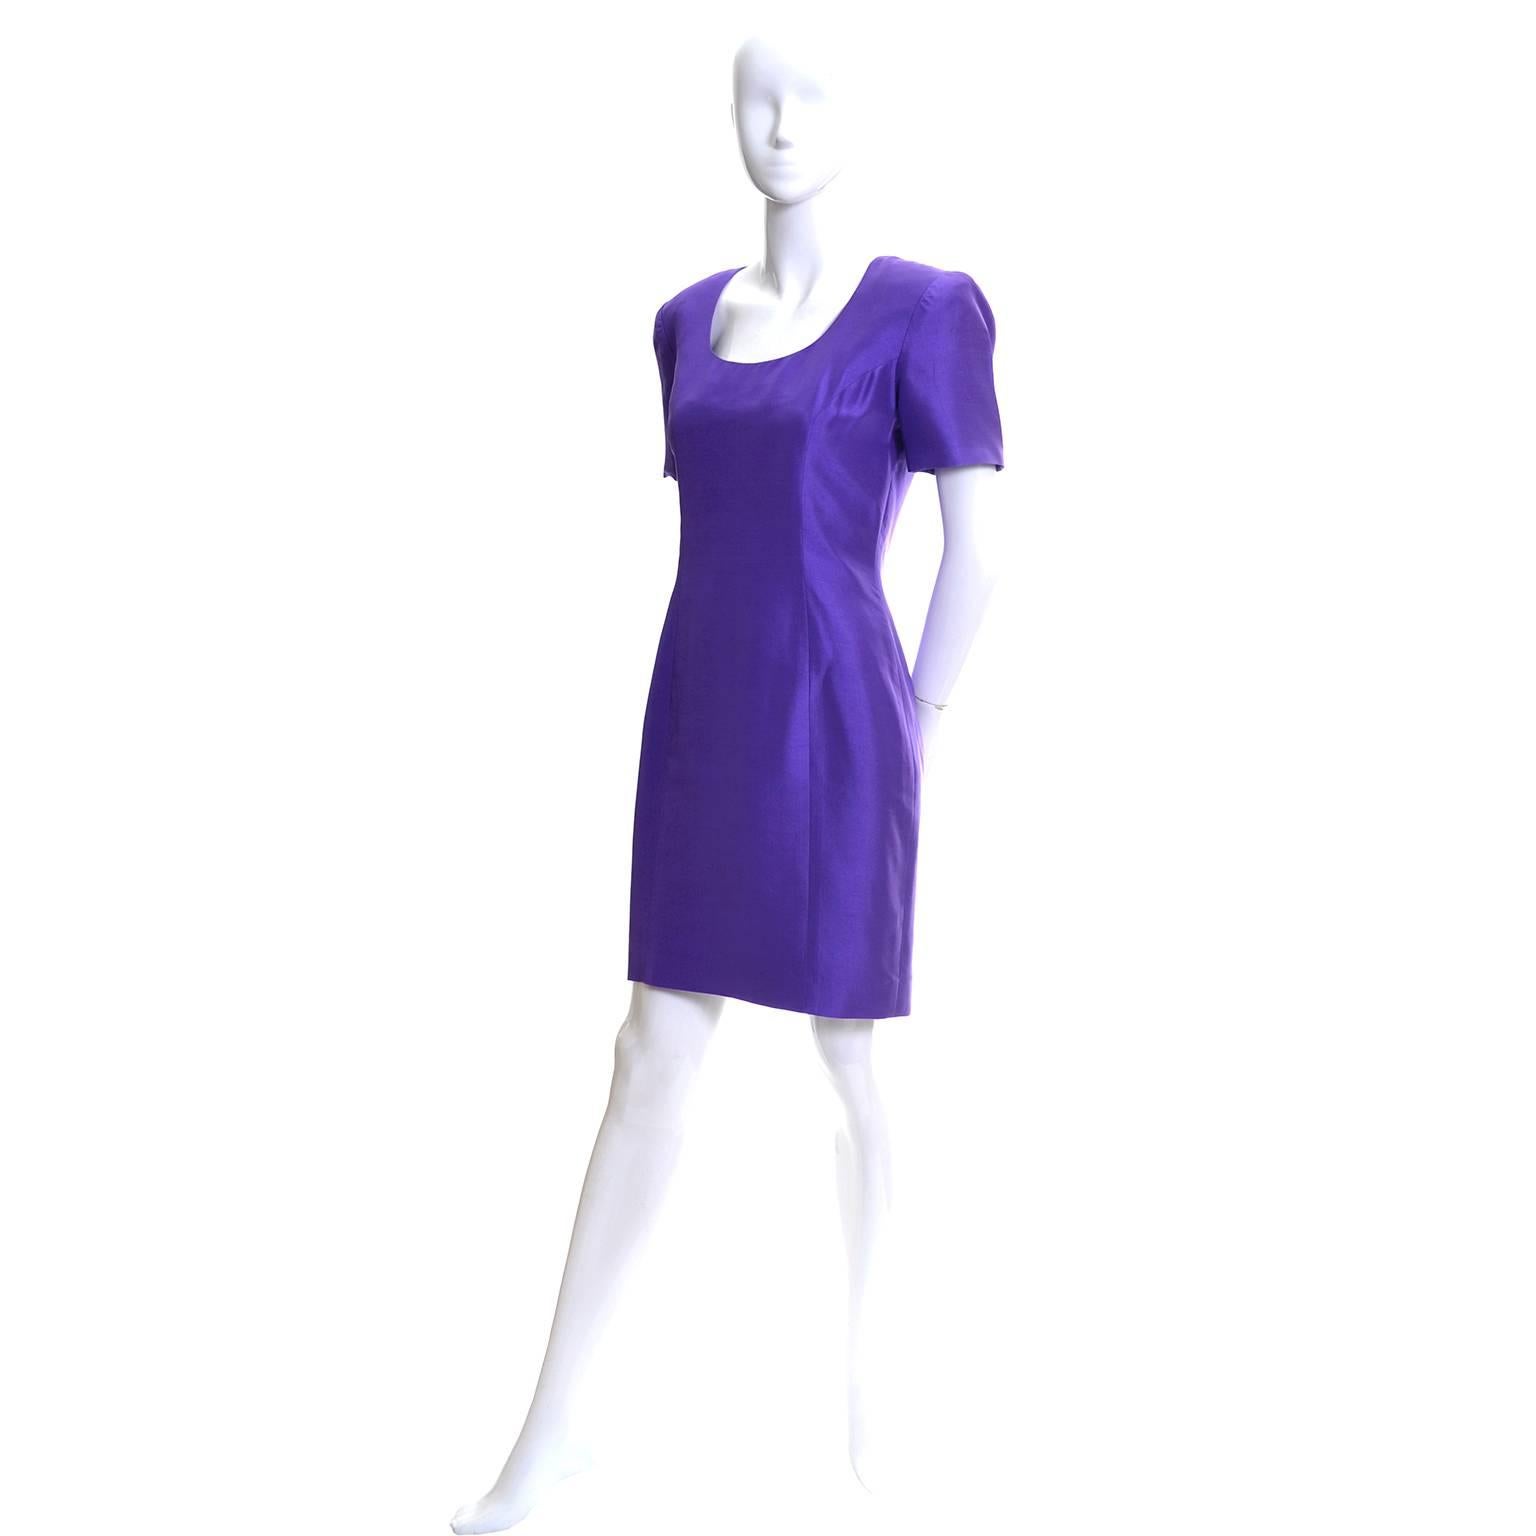 This classic vintage Scaasi dress is from the 1990's and is in as new condition.  This silk purple dress has has a back zipper and is fully lined. The dress is labeled a size 2, but fits more like a size 4 - please use the measurements as a guide